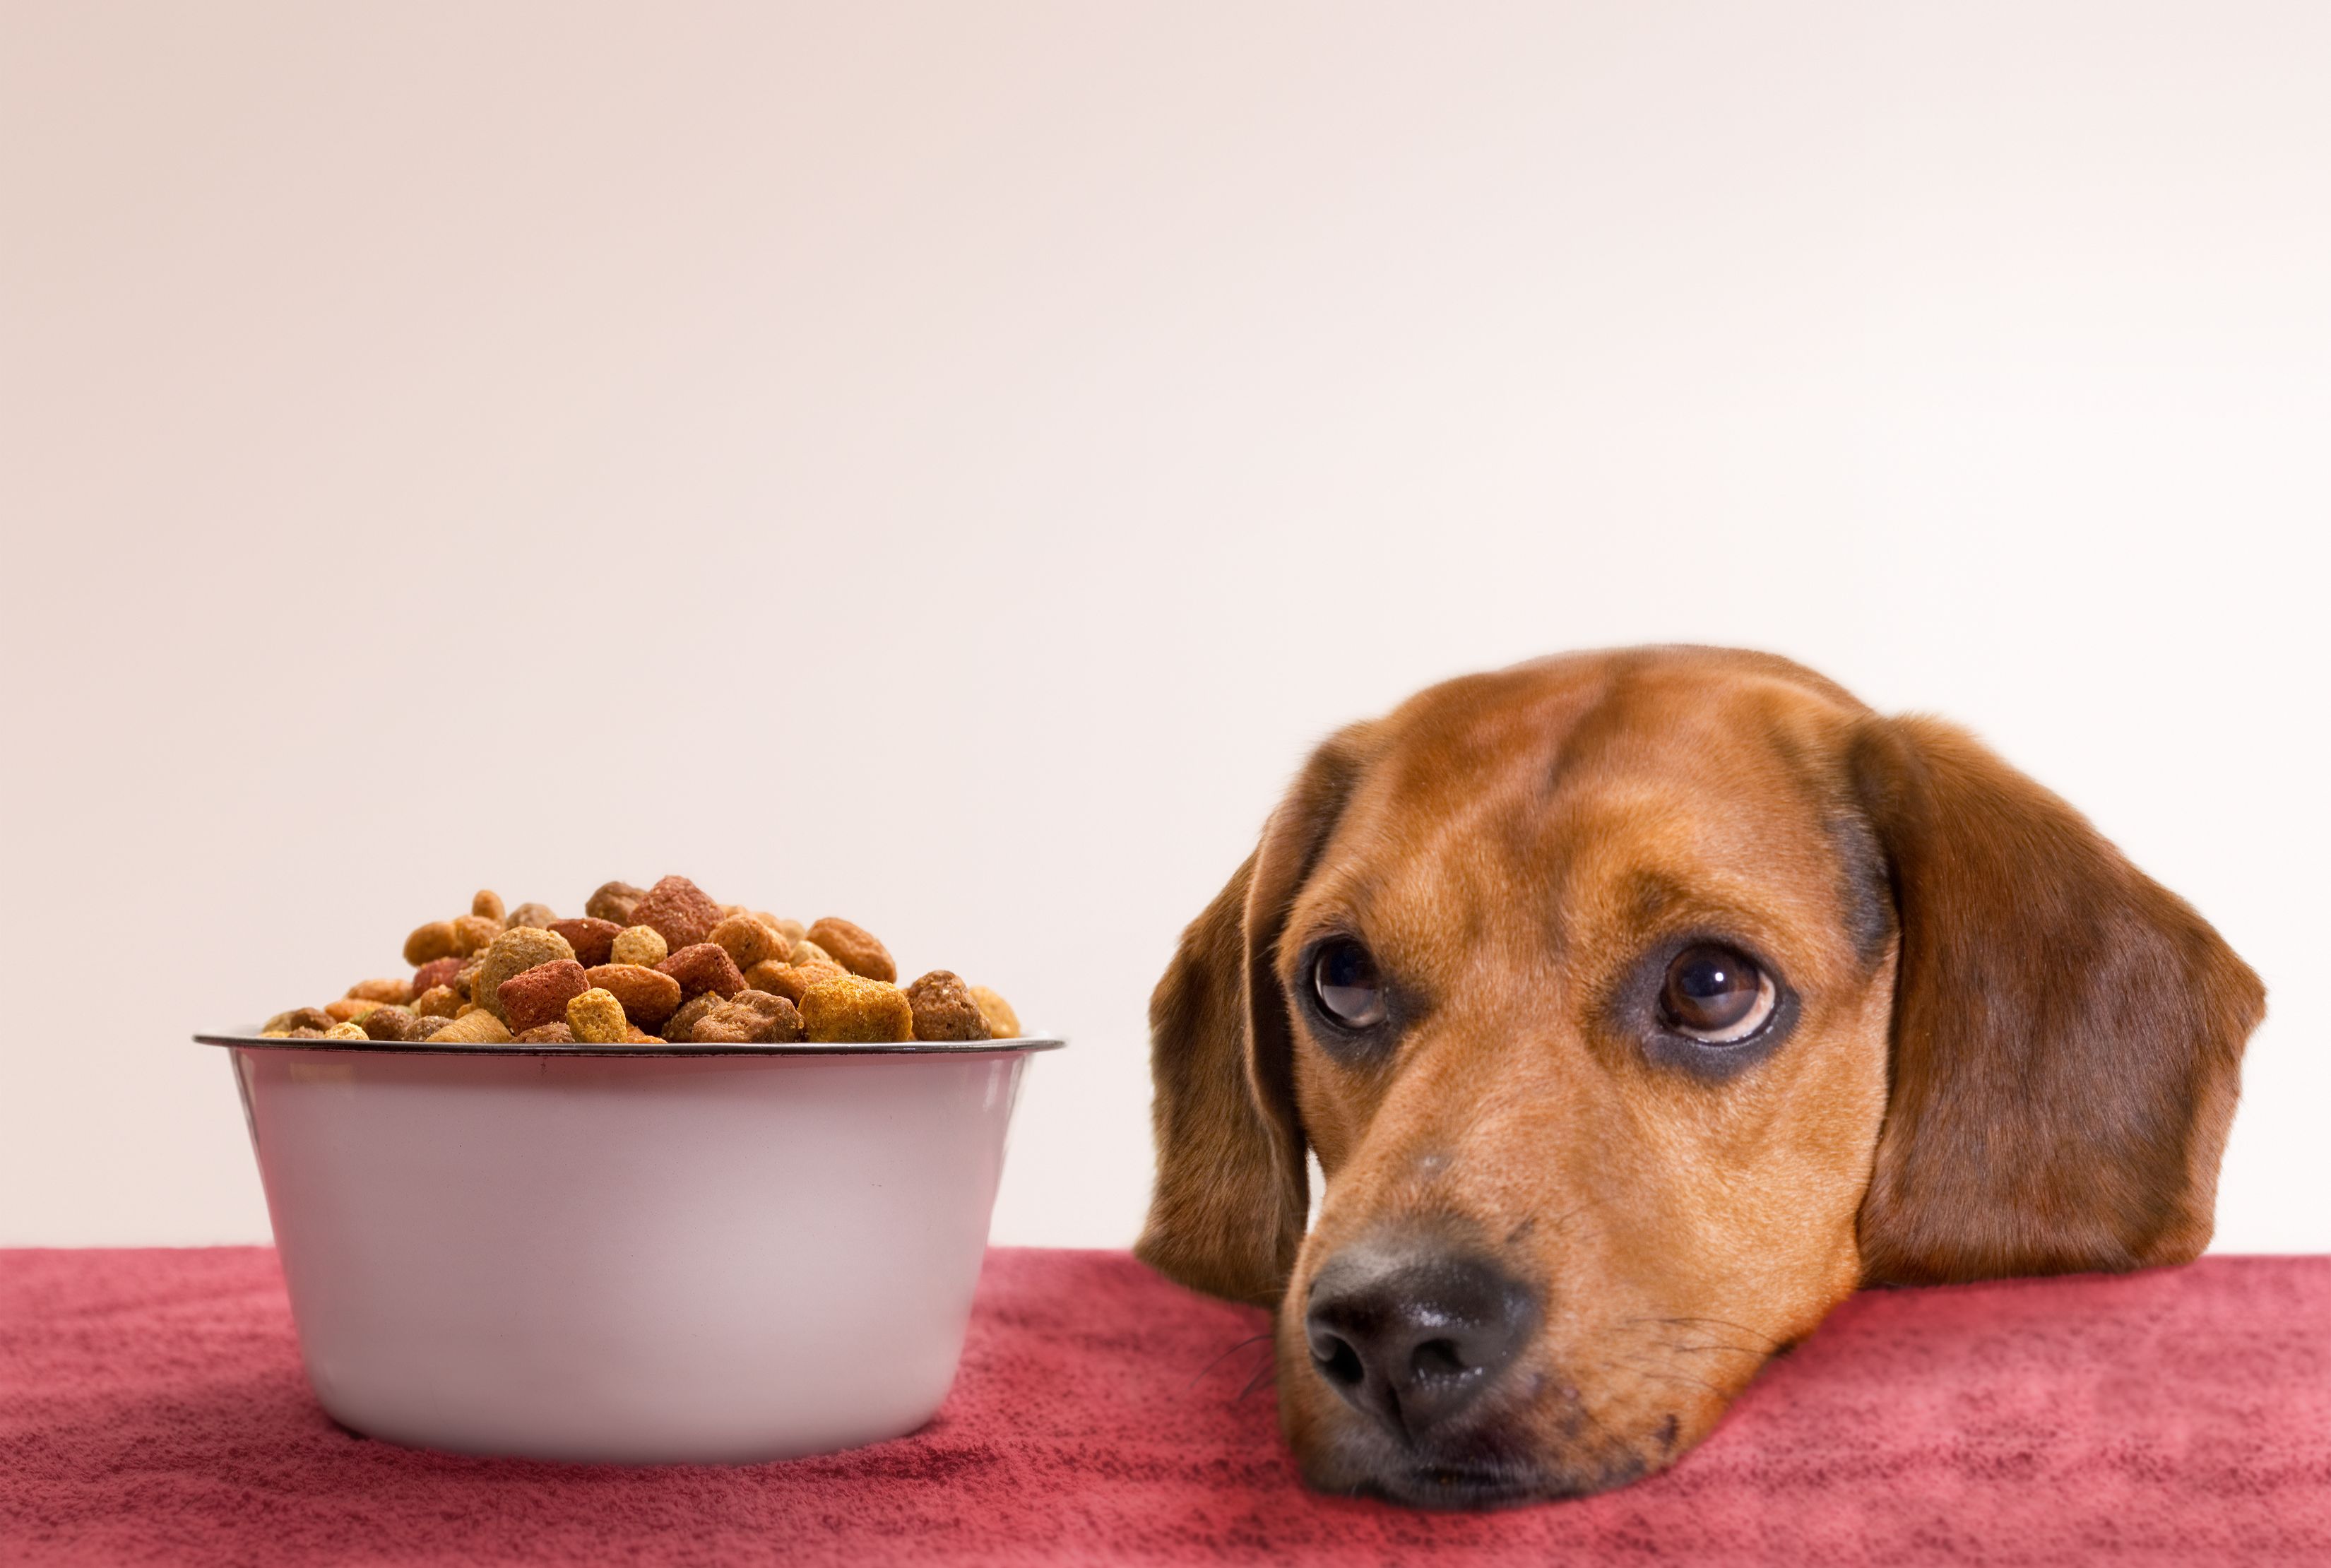 Potato-Based Pet Food Could Be Linked 